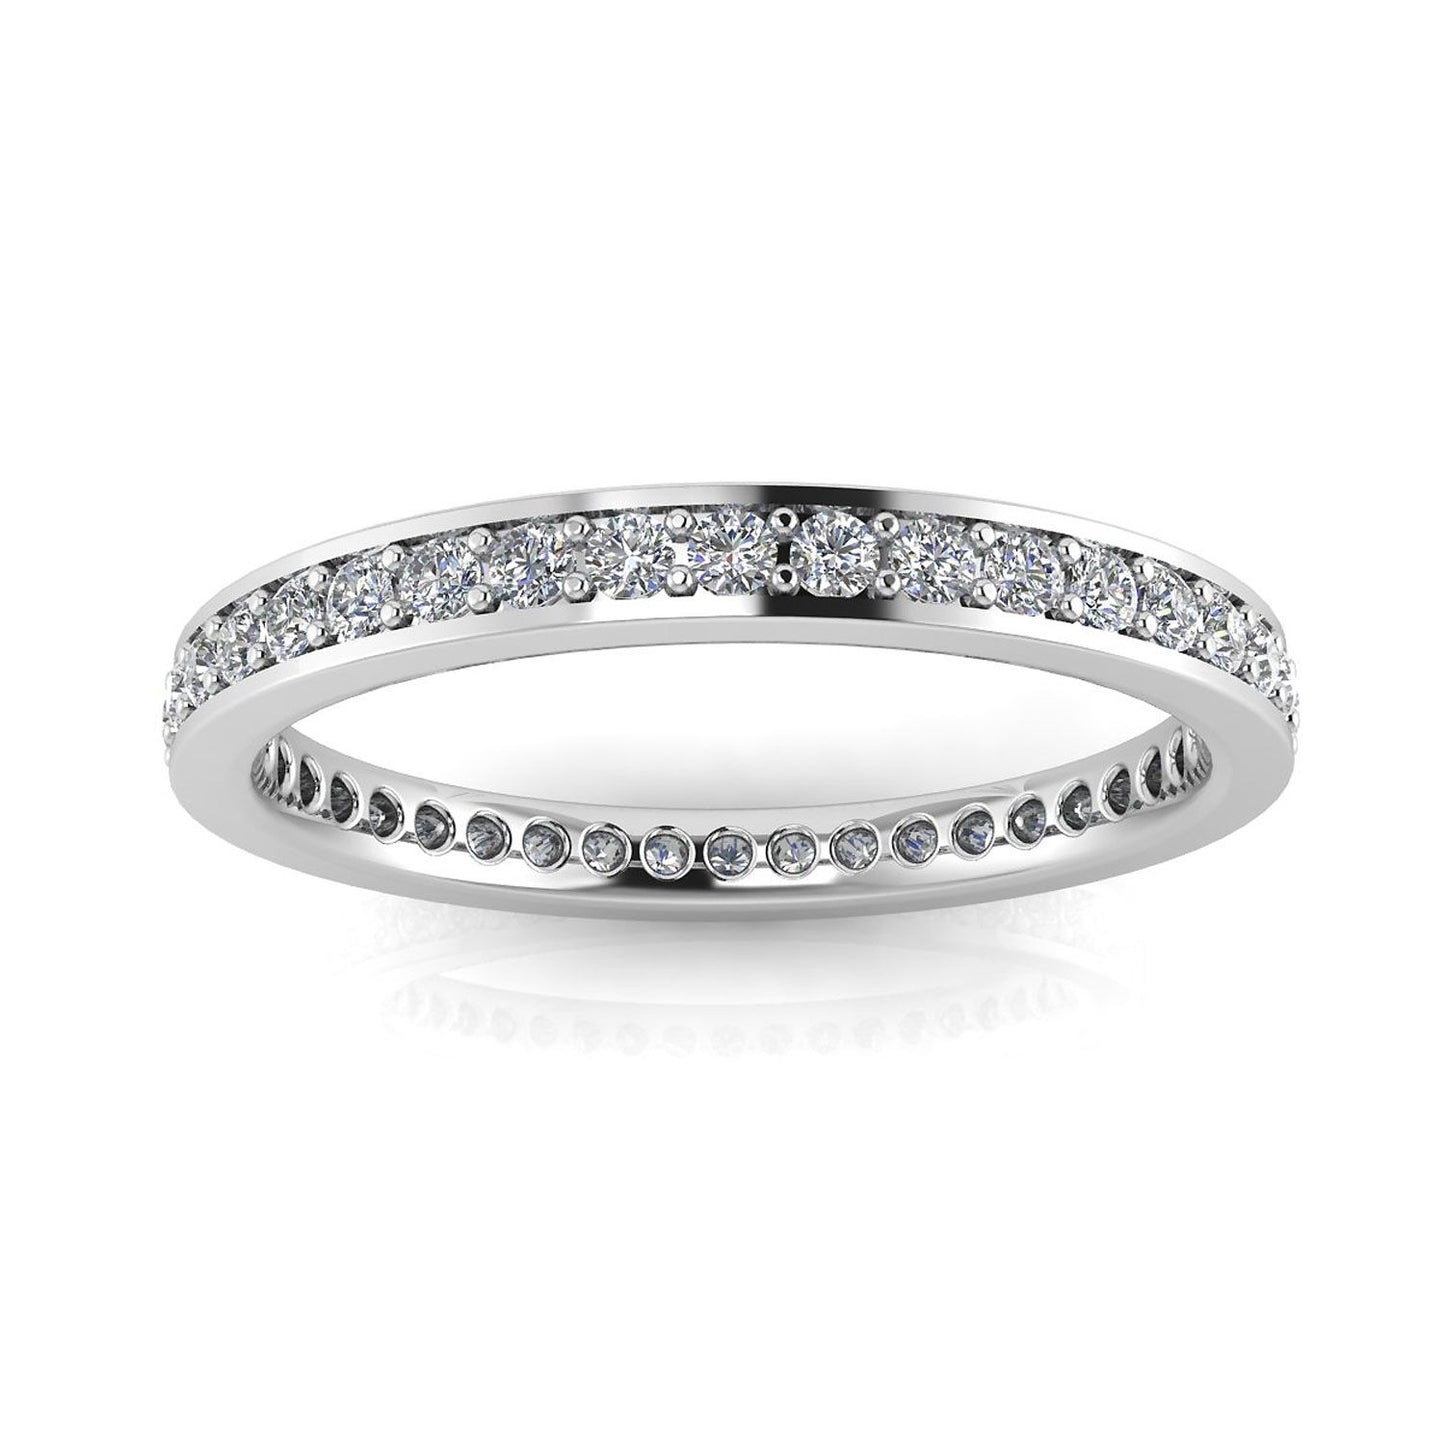 Round Brilliant Cut Diamond Channel Pave Set Eternity Ring In 14k White Gold  (0.5ct. Tw.) Ring Size 8